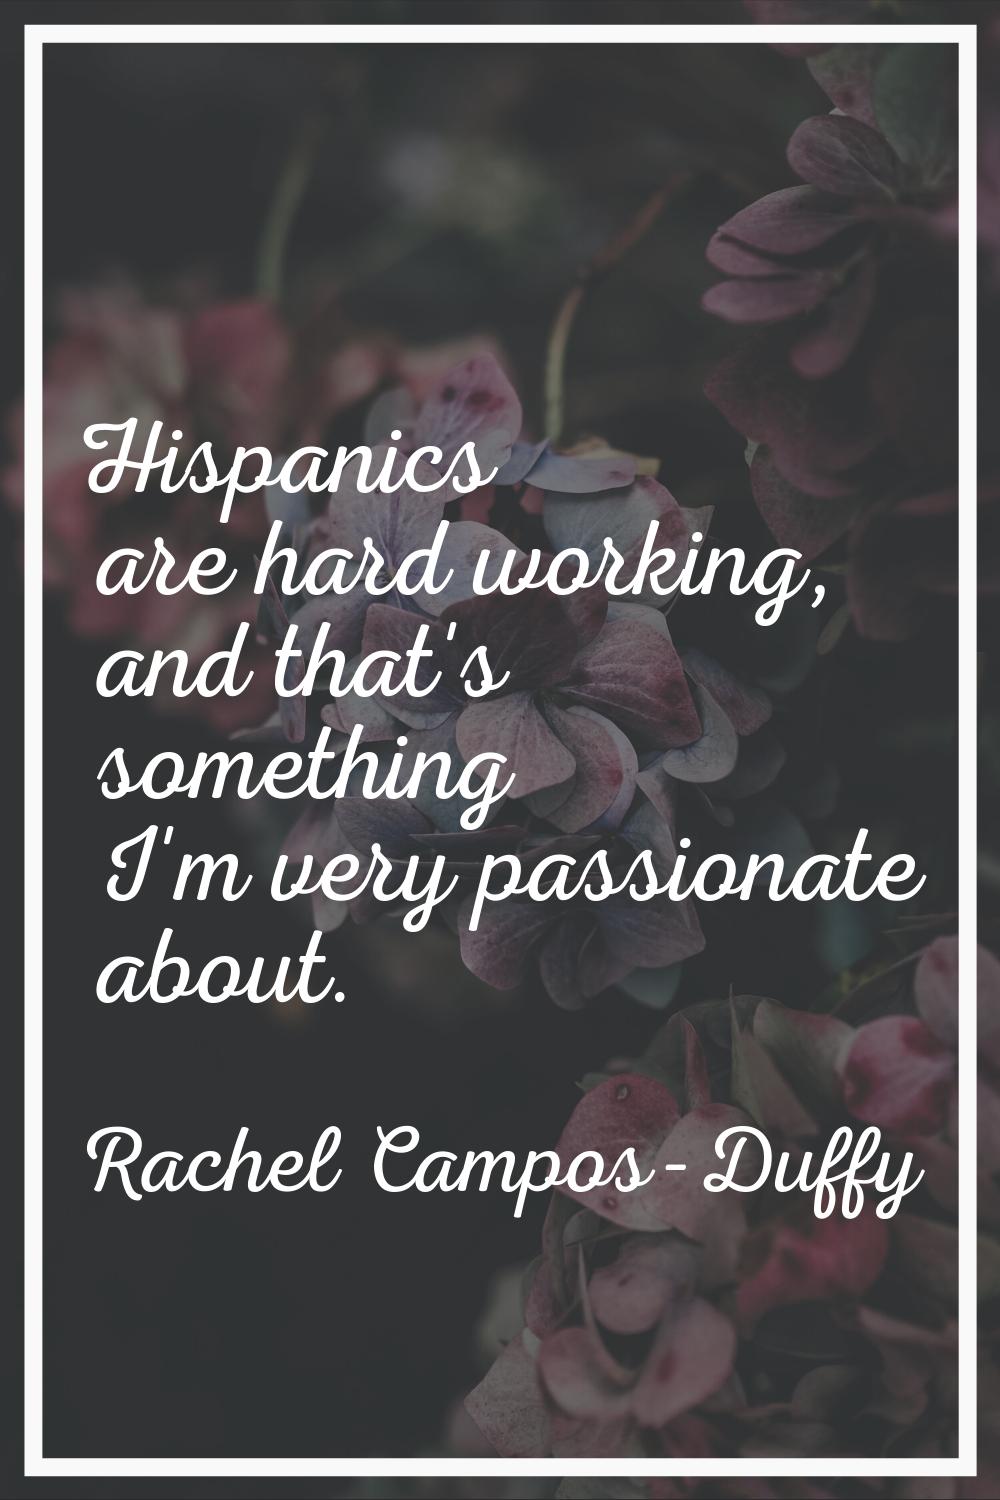 Hispanics are hard working, and that's something I'm very passionate about.